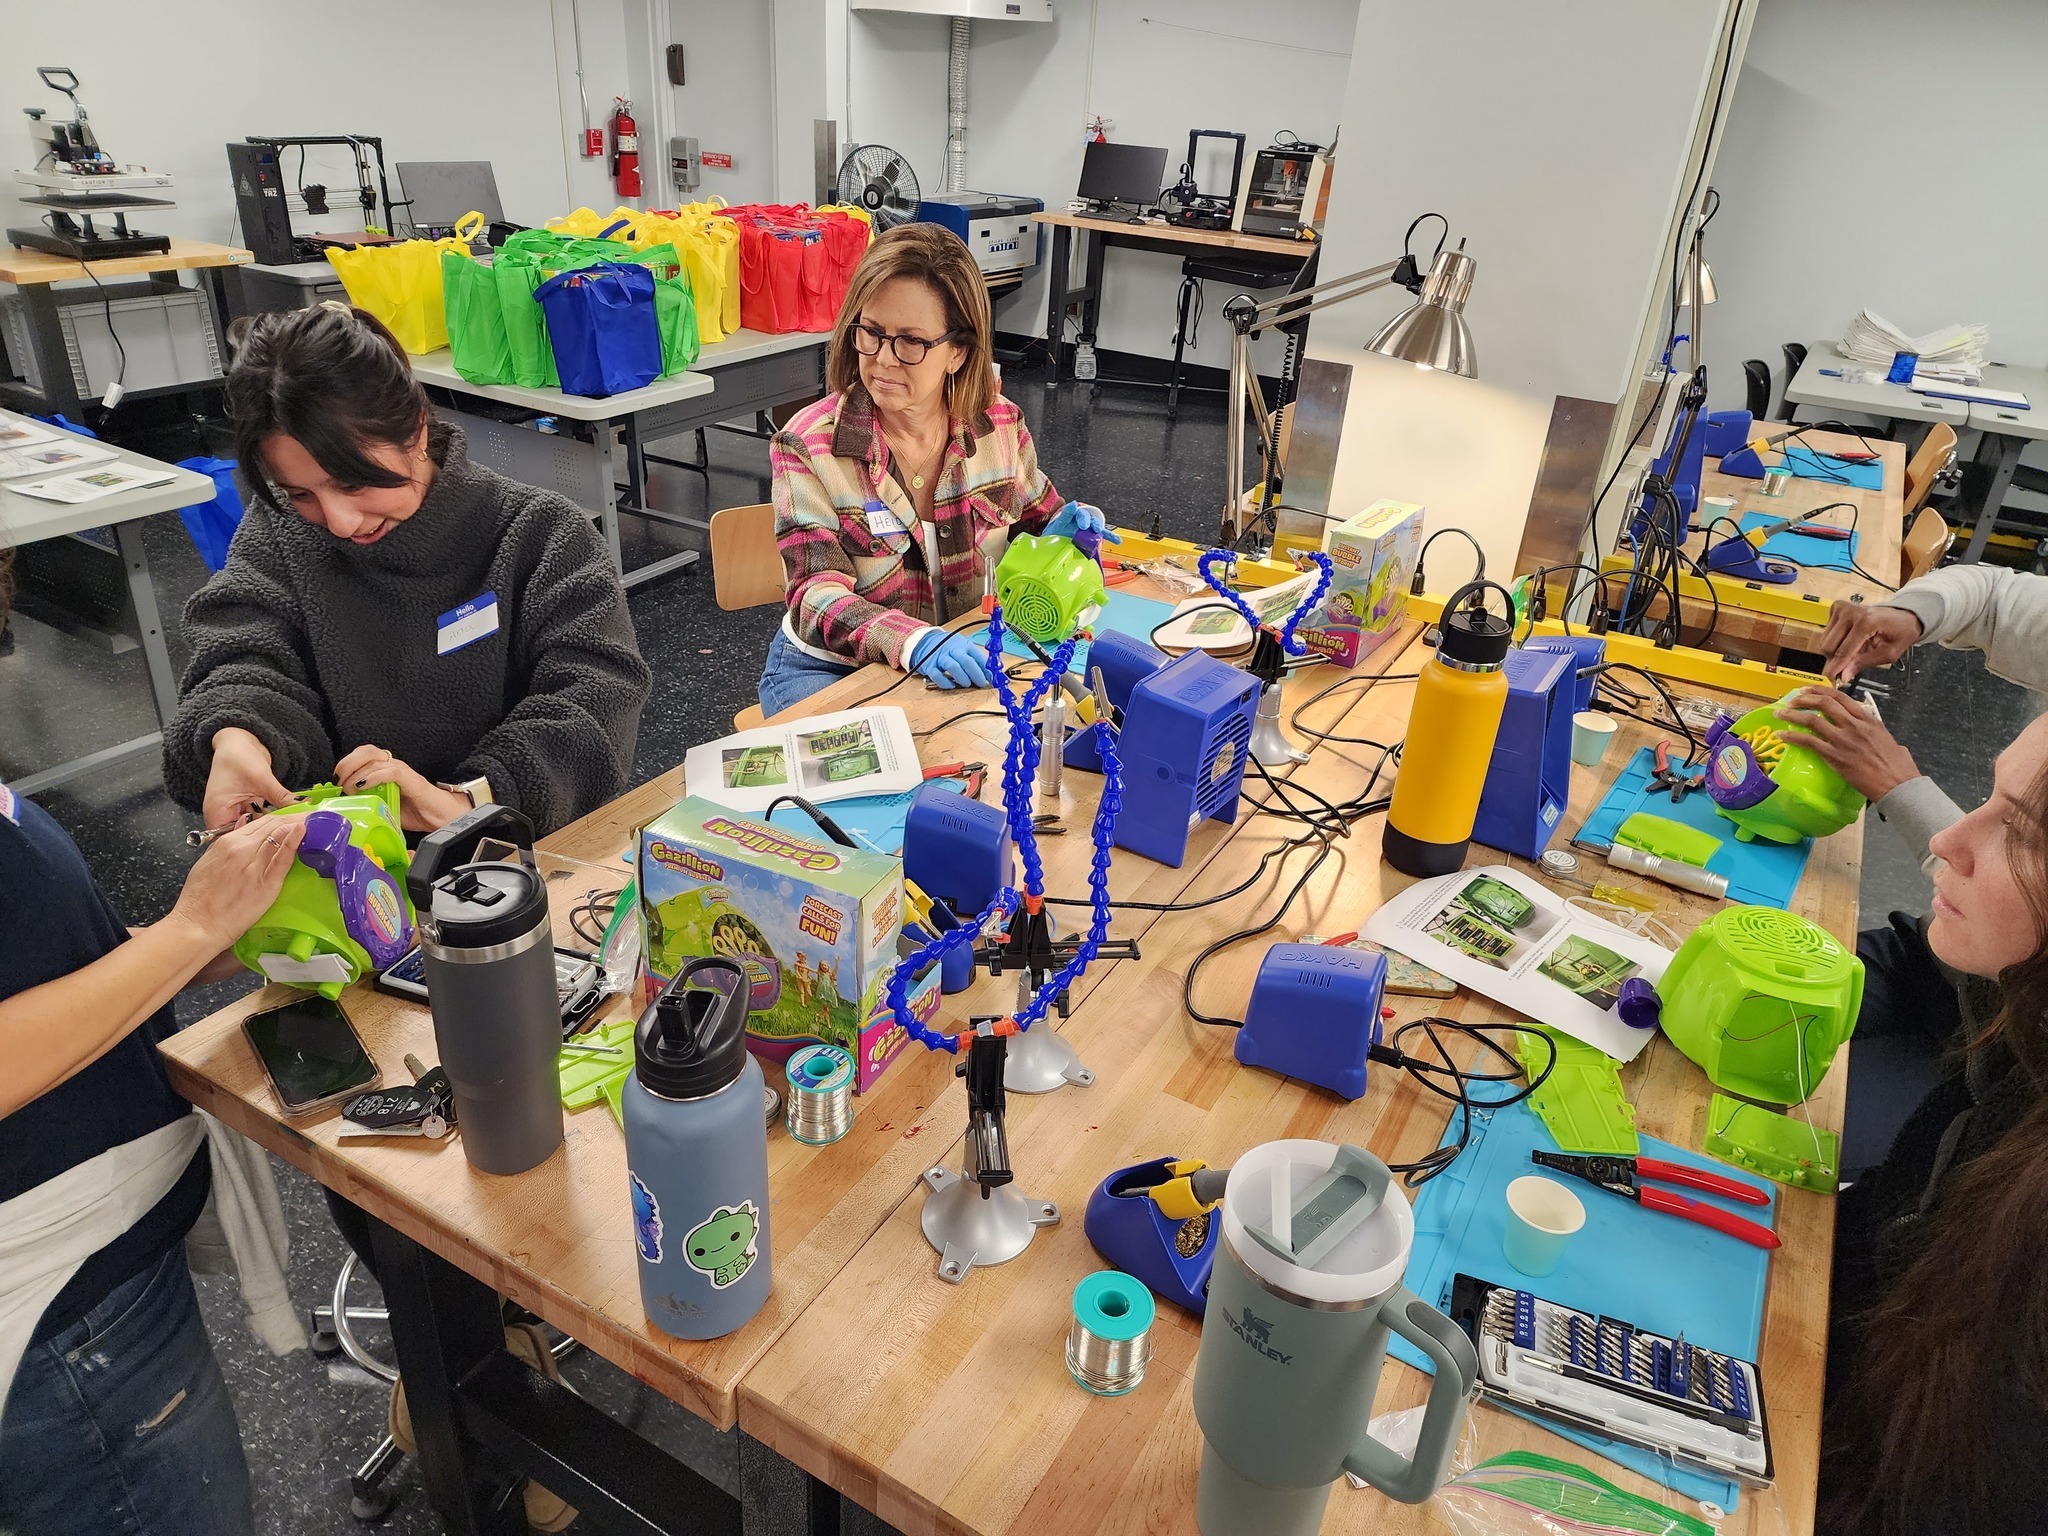 Four individuals sit around a table modifying toys using various tools.